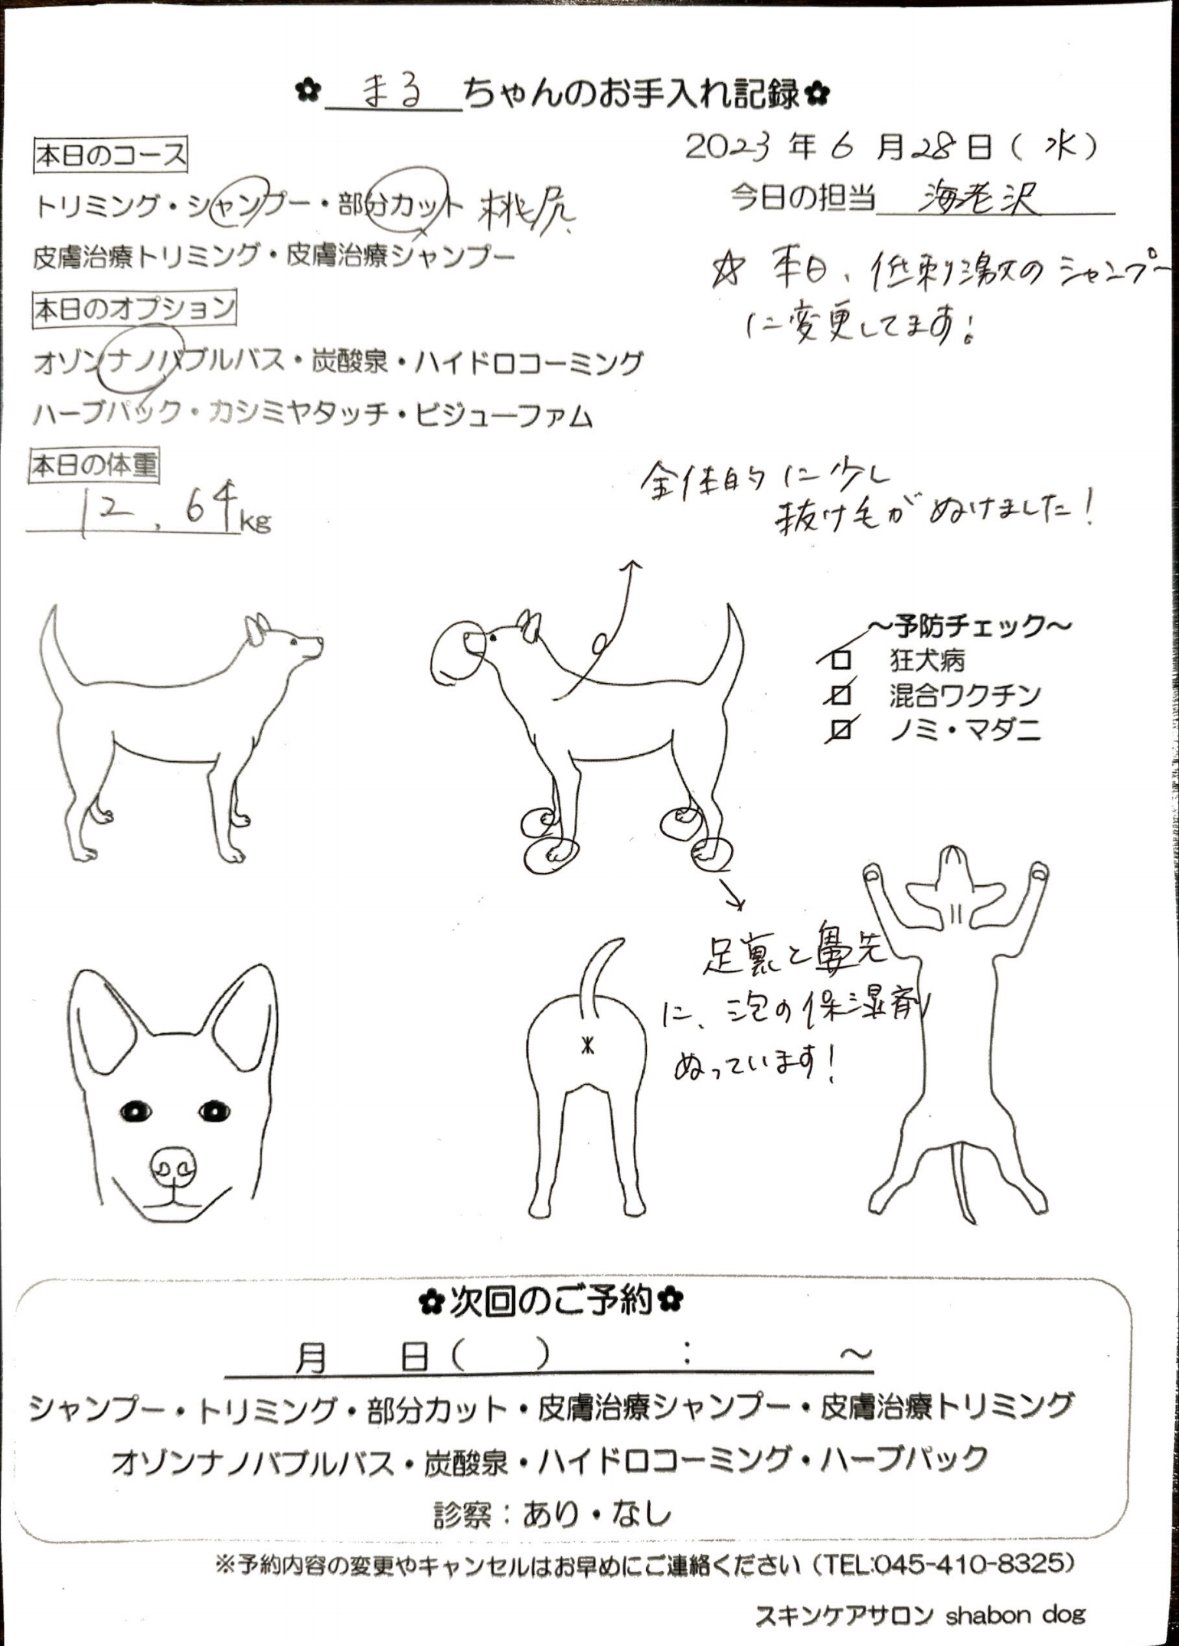 The pet spa we take Maru to is at the vet. Fortunately he likes the female employees there and goes without protest. This is a checkup sheet noting they found some redness and that they gave him a peach butt cut. Lol